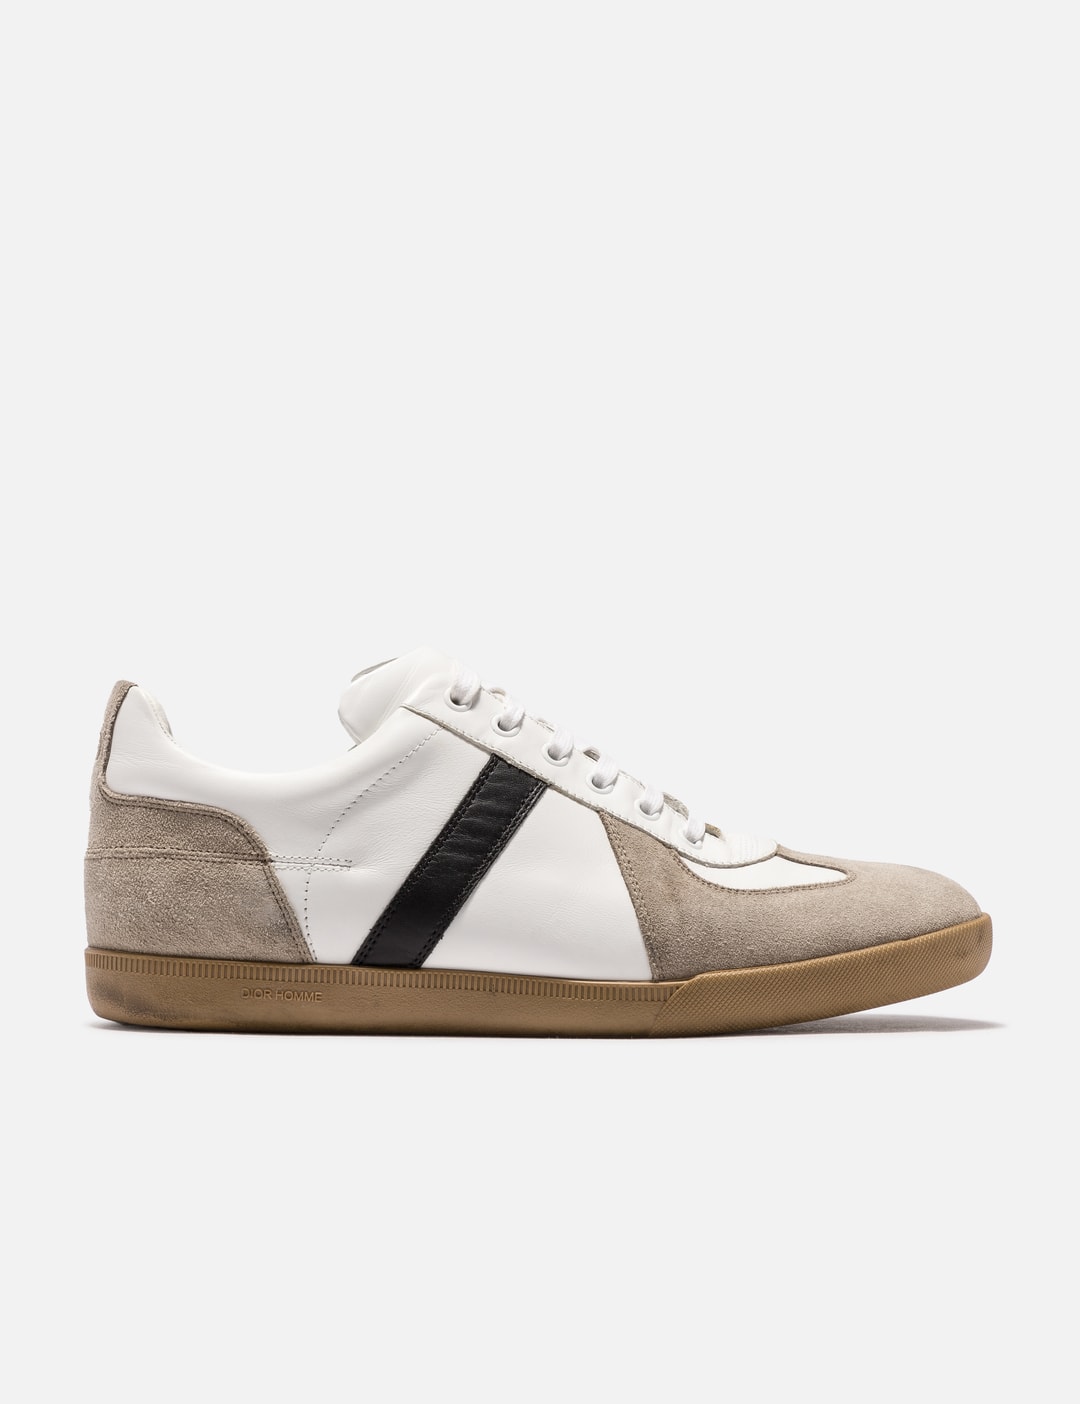 Dior - DIOR HOMME B01 SNEAKER | HBX - Globally Curated Fashion and ...